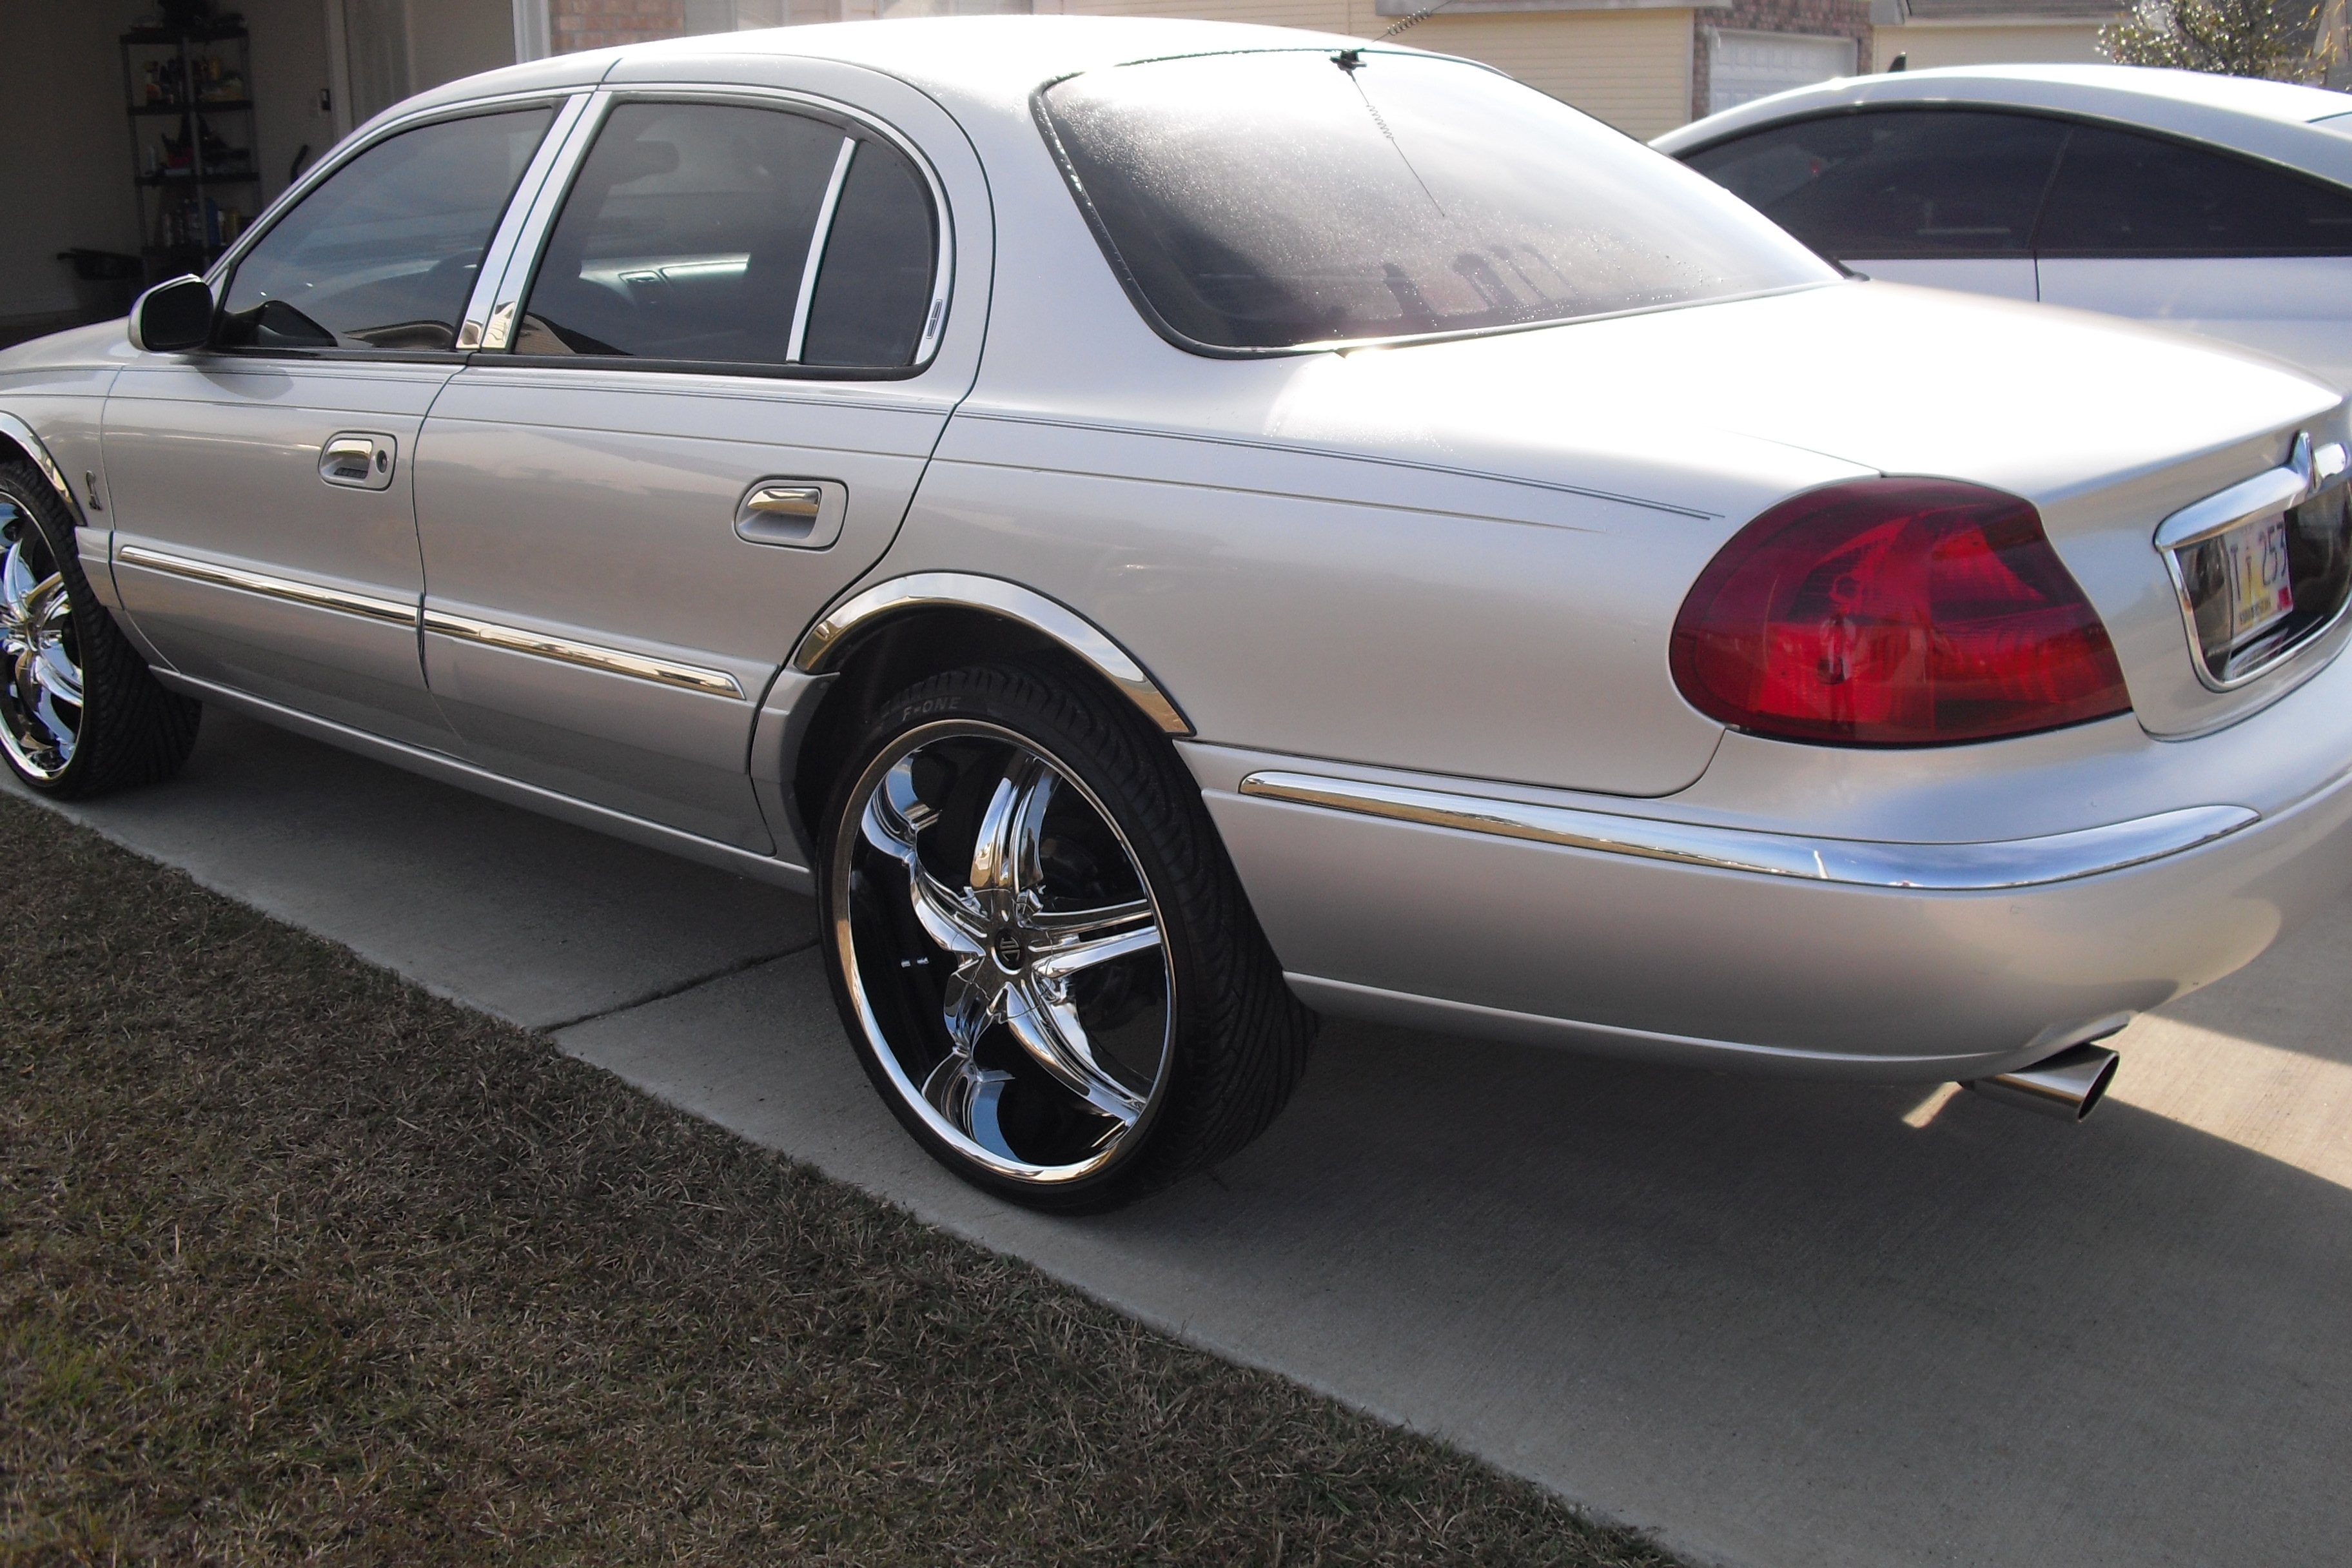 2000 LINCOLN CONTINENTAL - Image #7